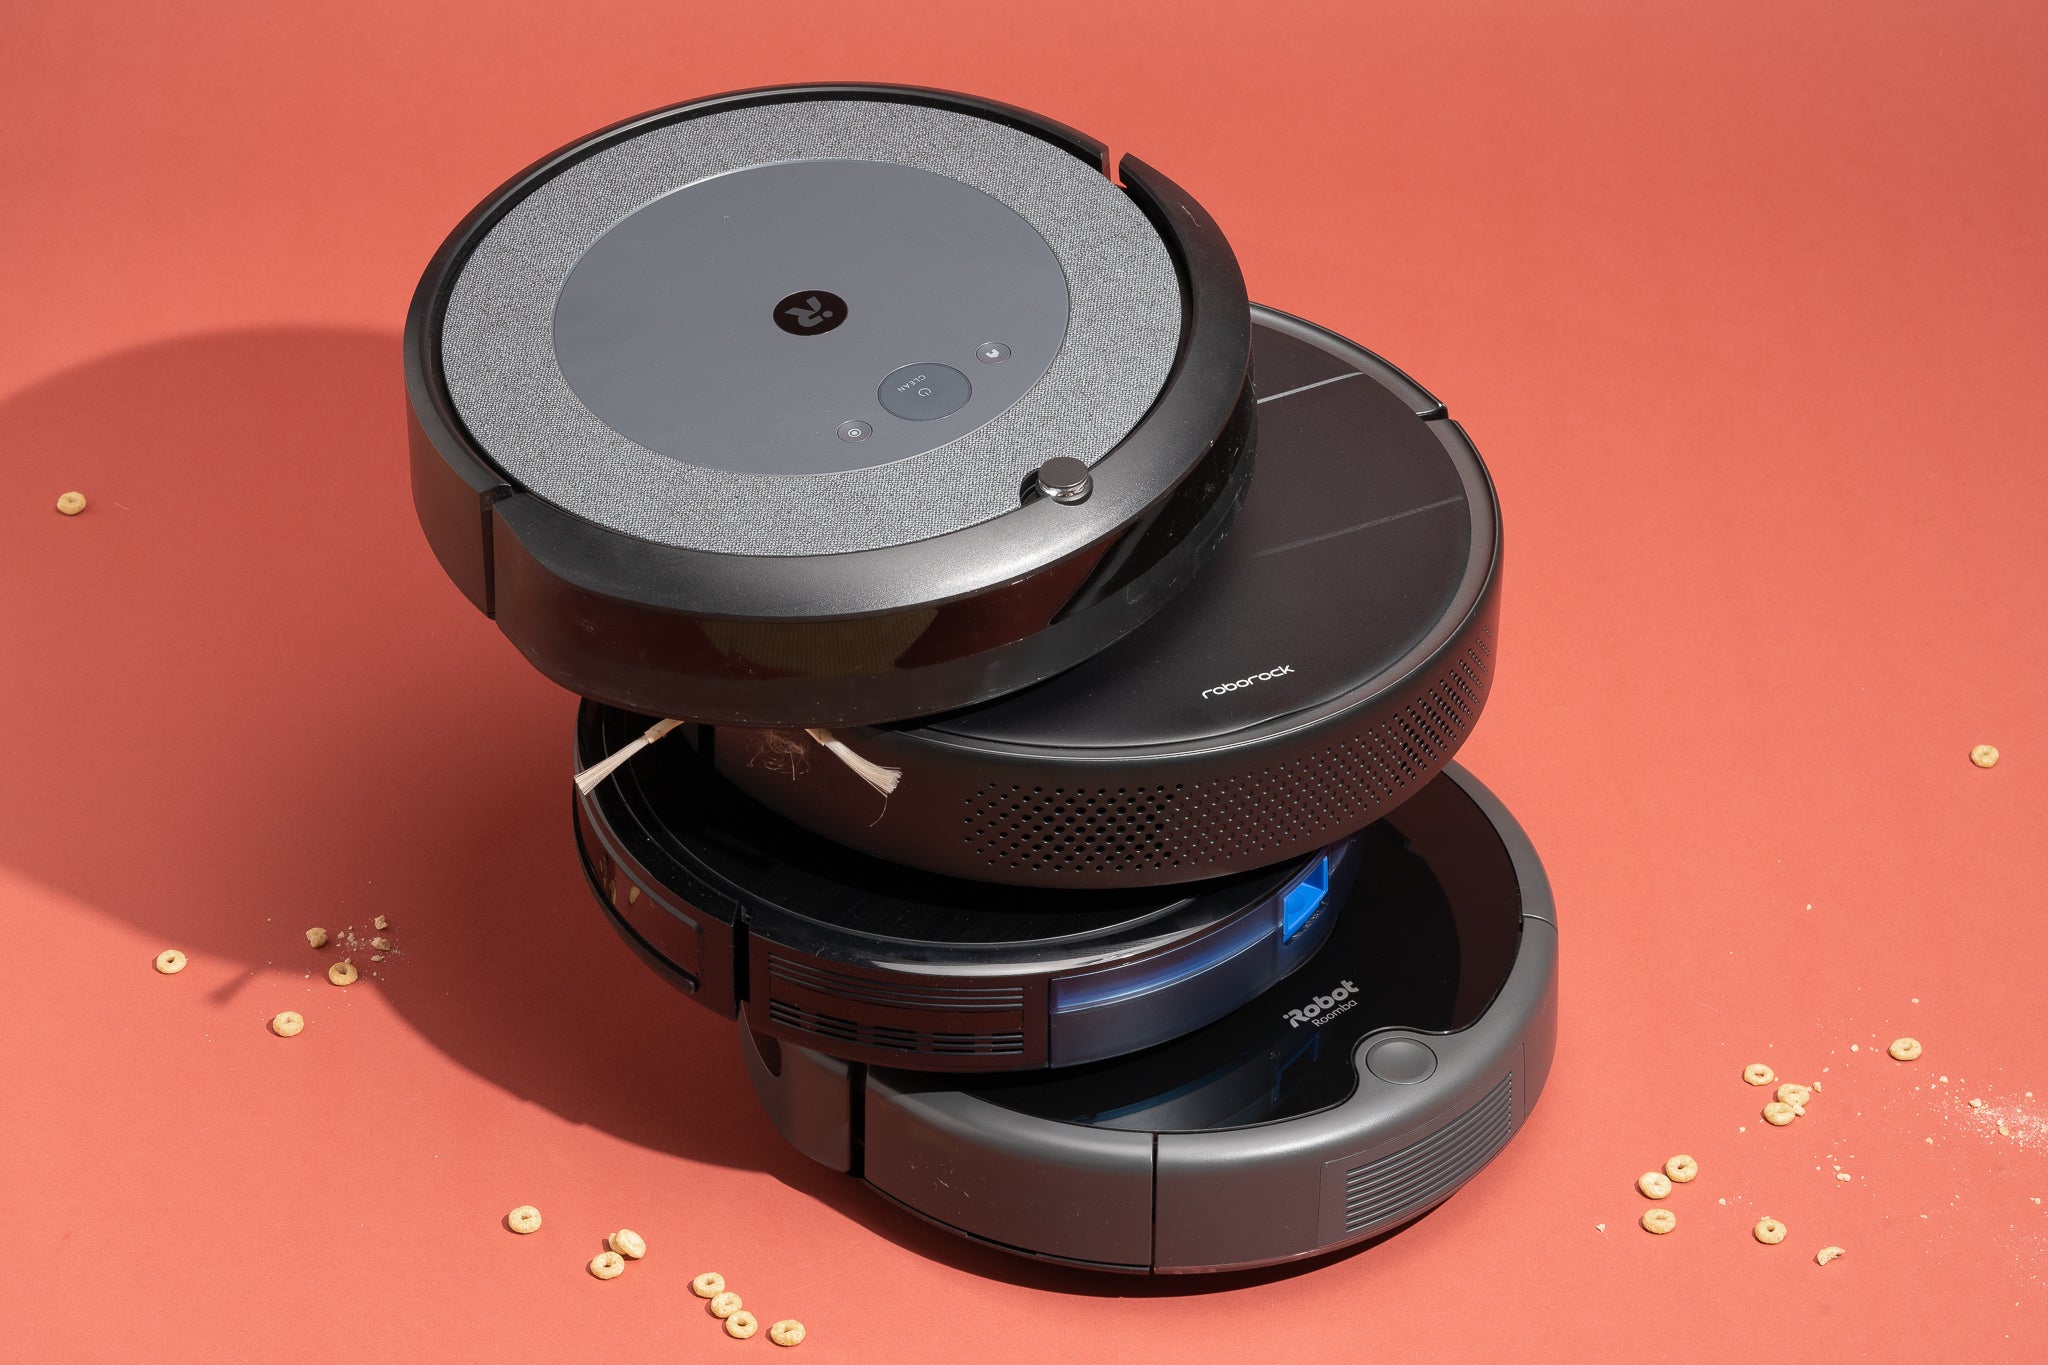 What Is The Best Budget Robot Vacuum